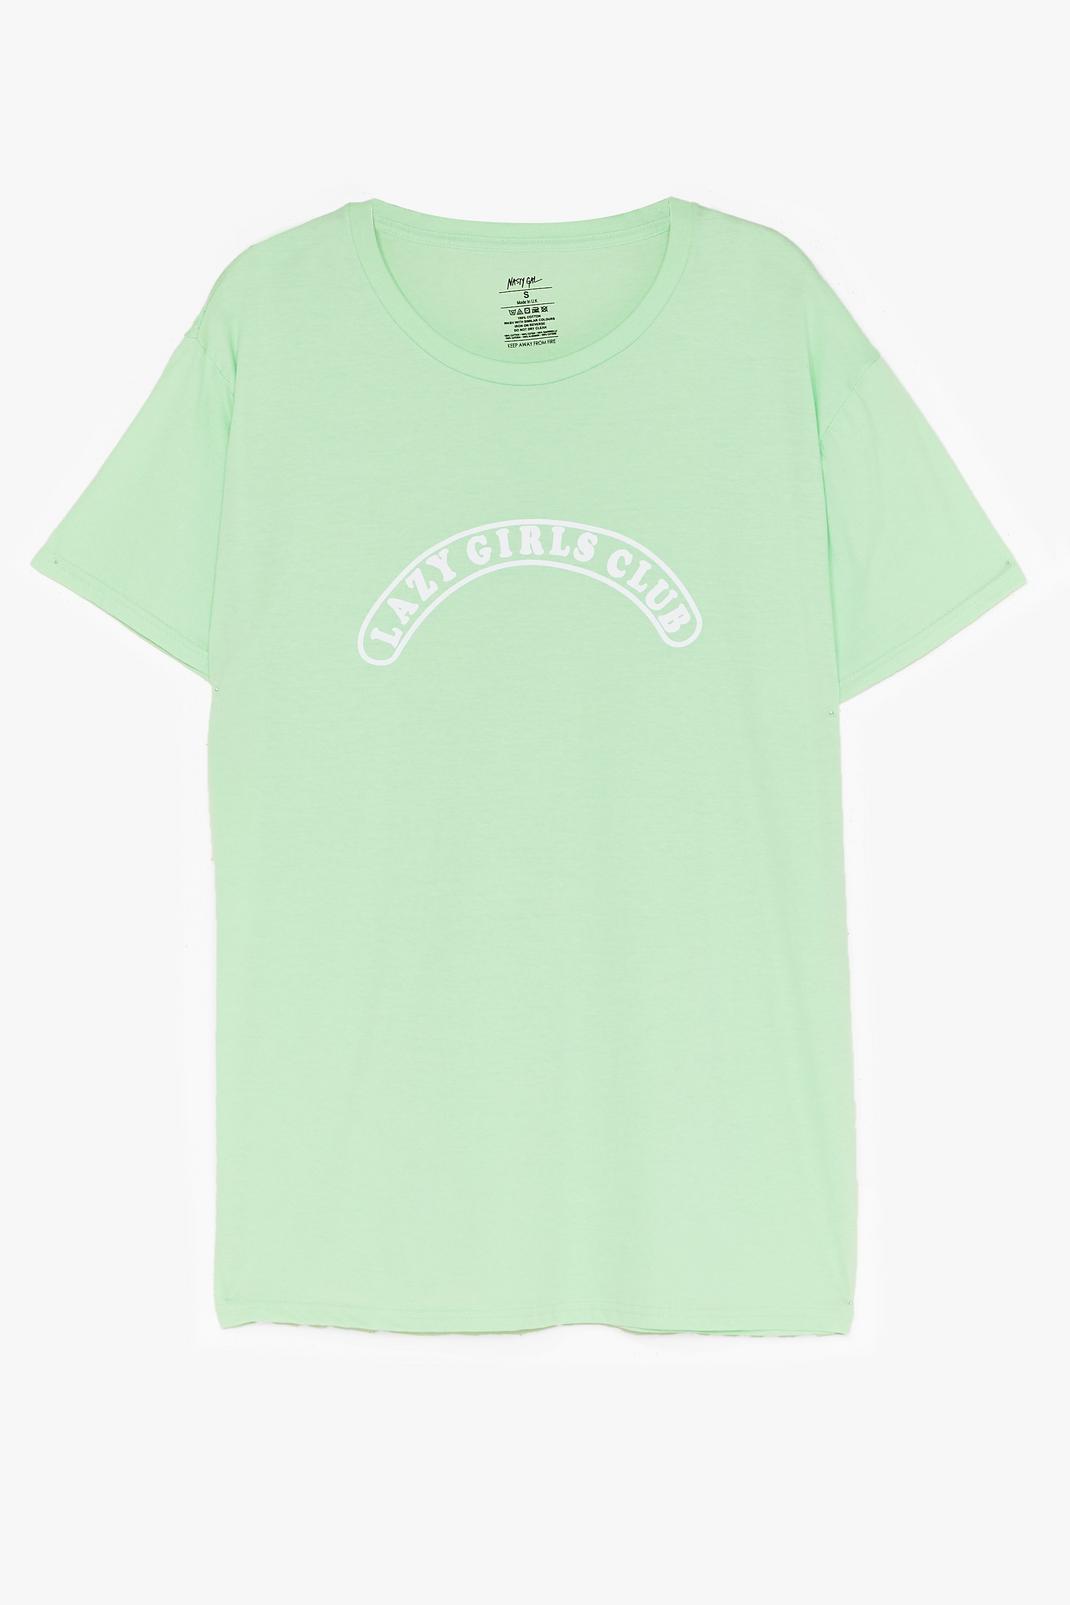 Mint Lazy Girls Club Graphic Tee image number 1